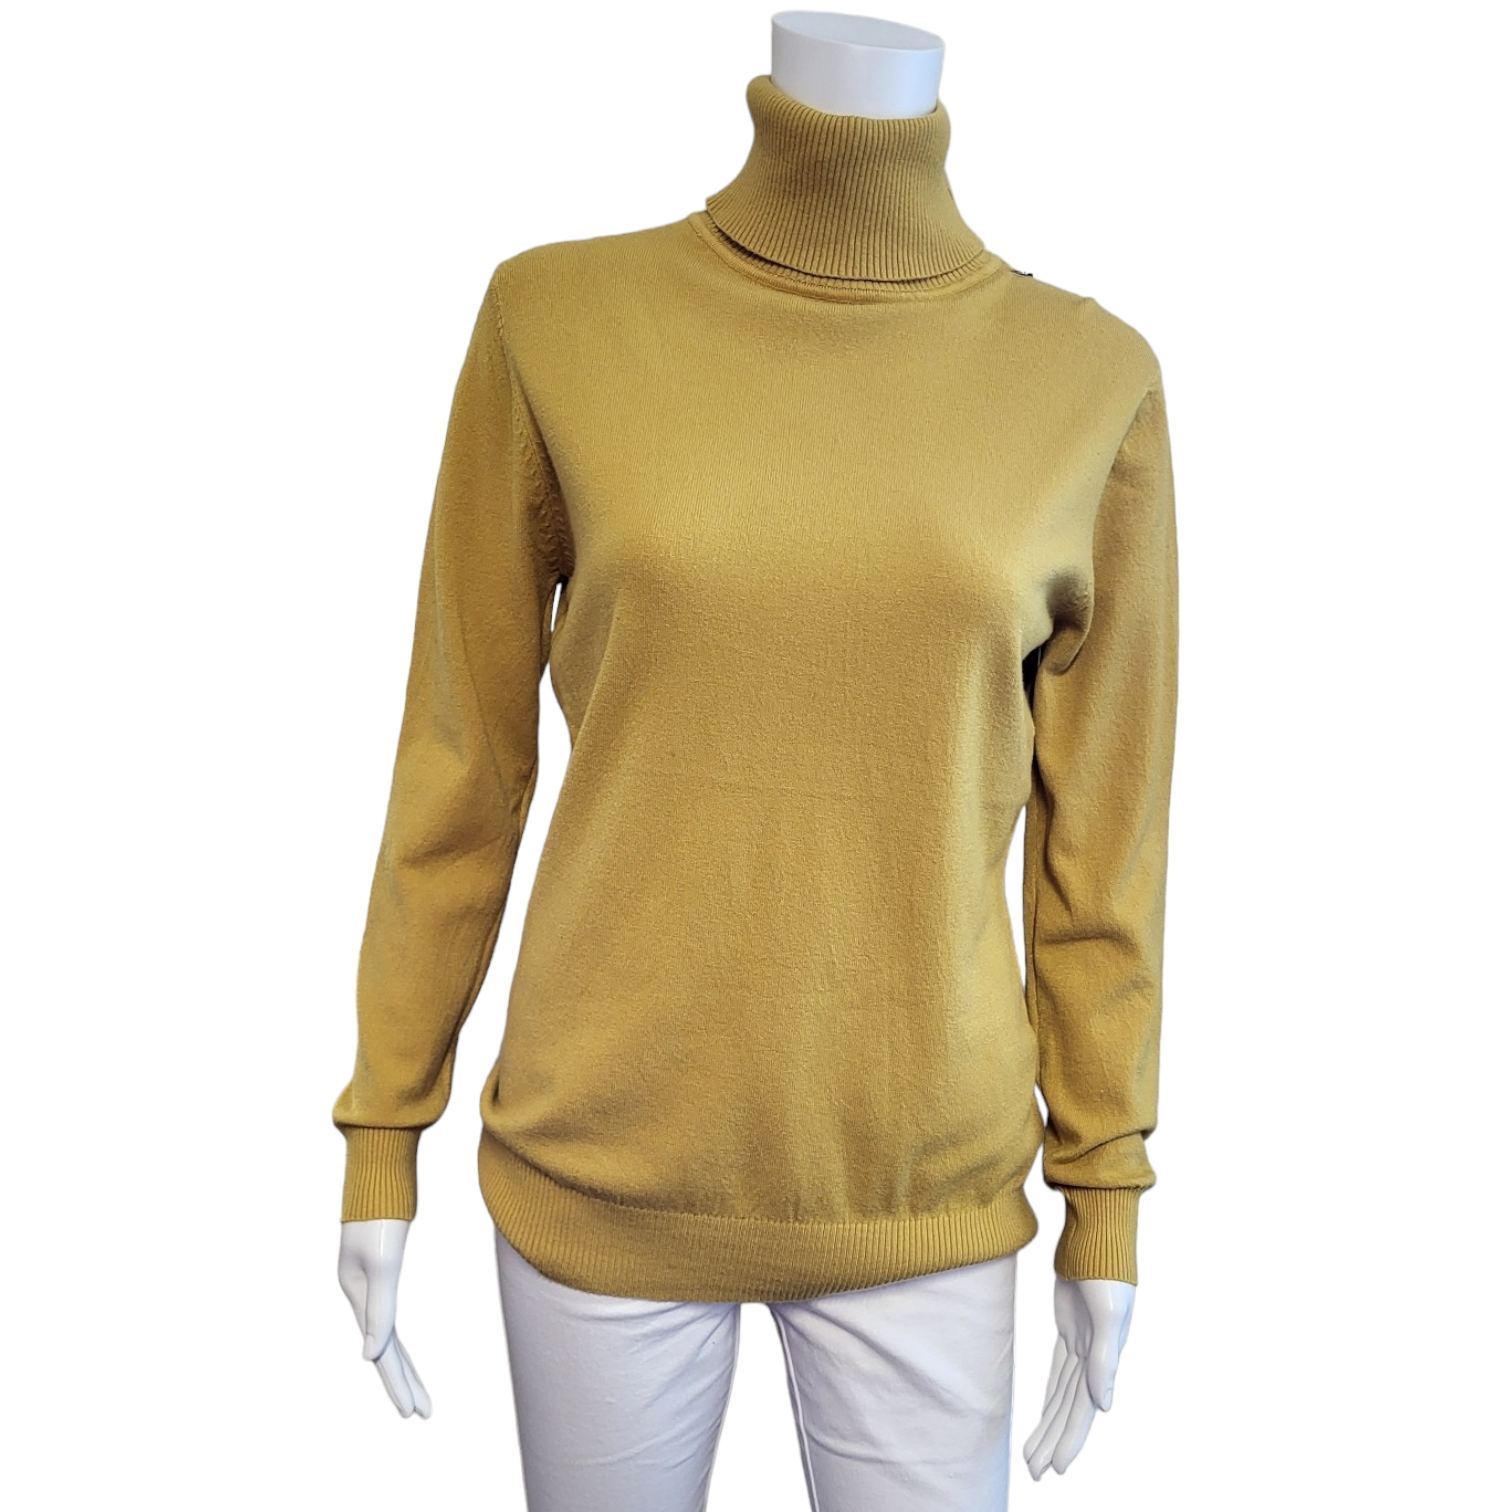 long sleeved polo neck jumper. Fine knit, mustard colour.